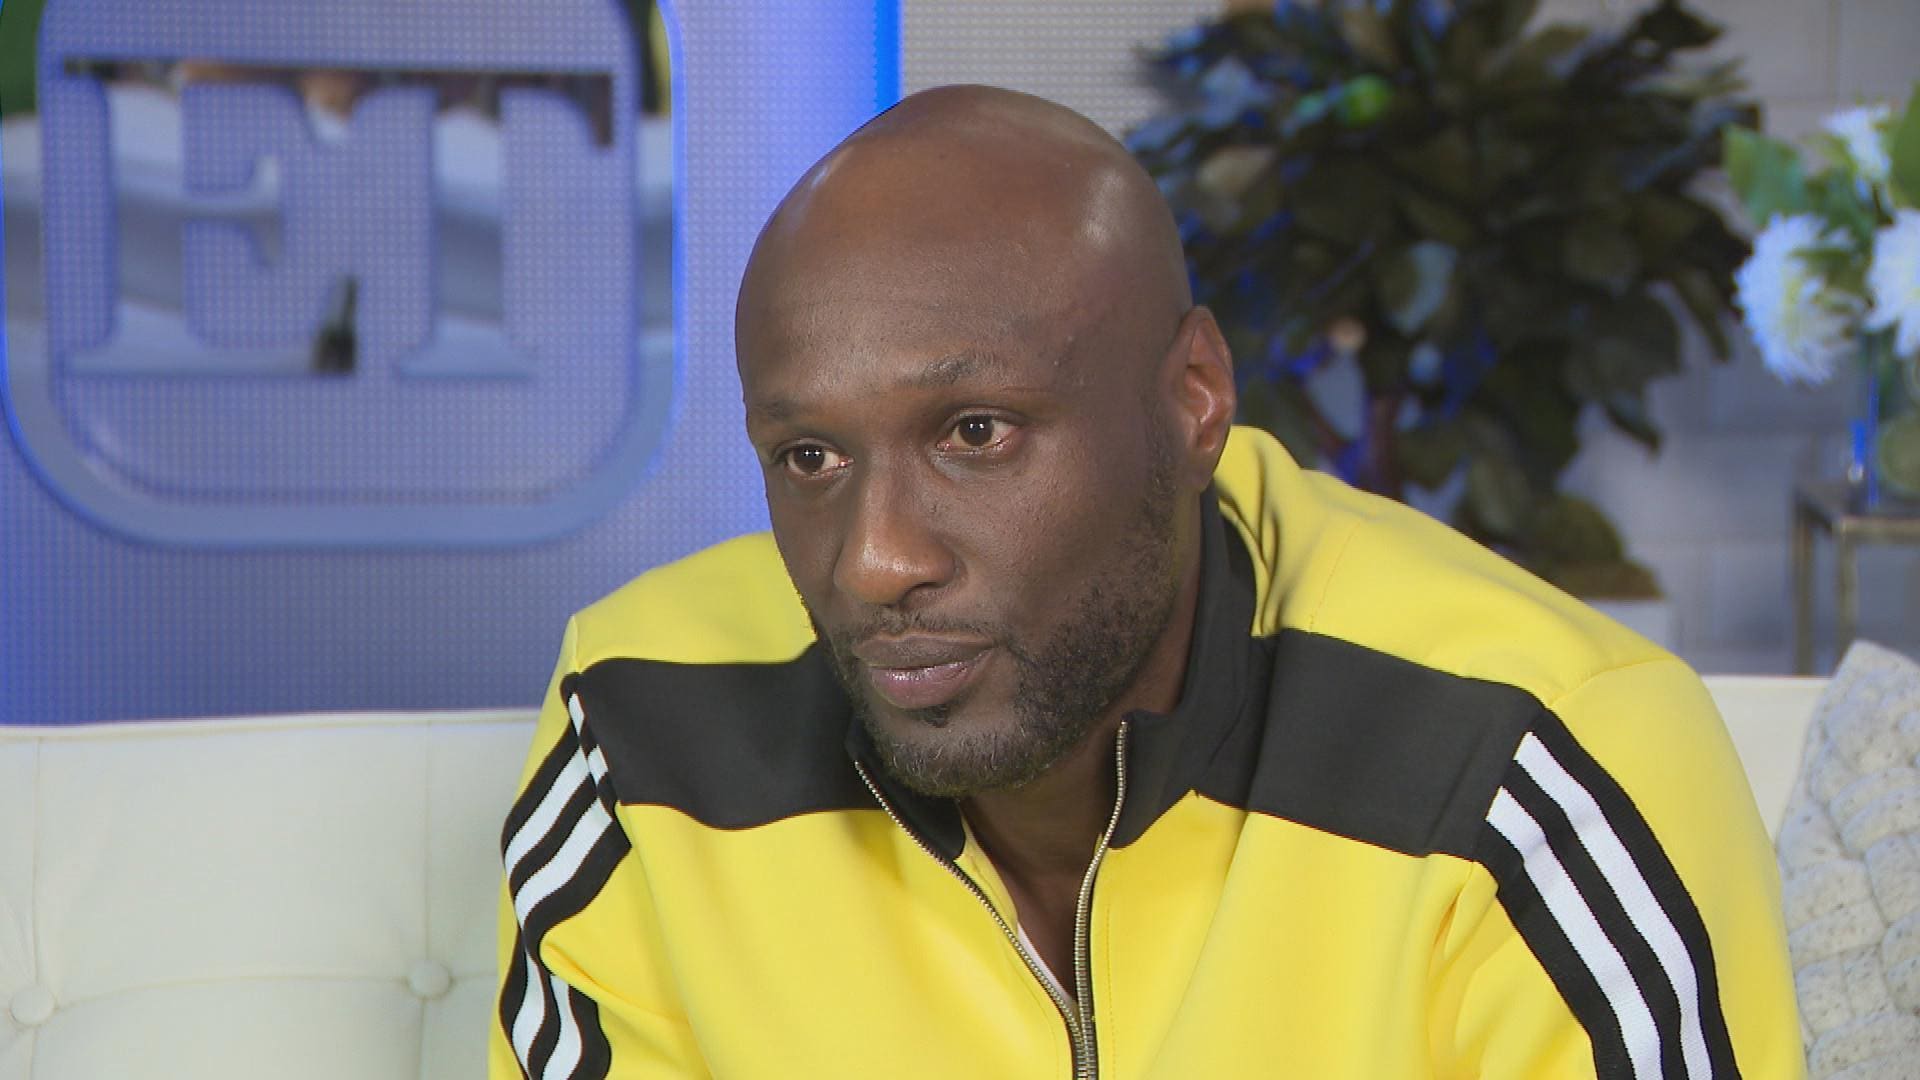 Lamar Odom Publicly Professes His Love And Respect For Sabrina Parr - See His Answer To A Fan Who Mentioned Khloe Kardashian